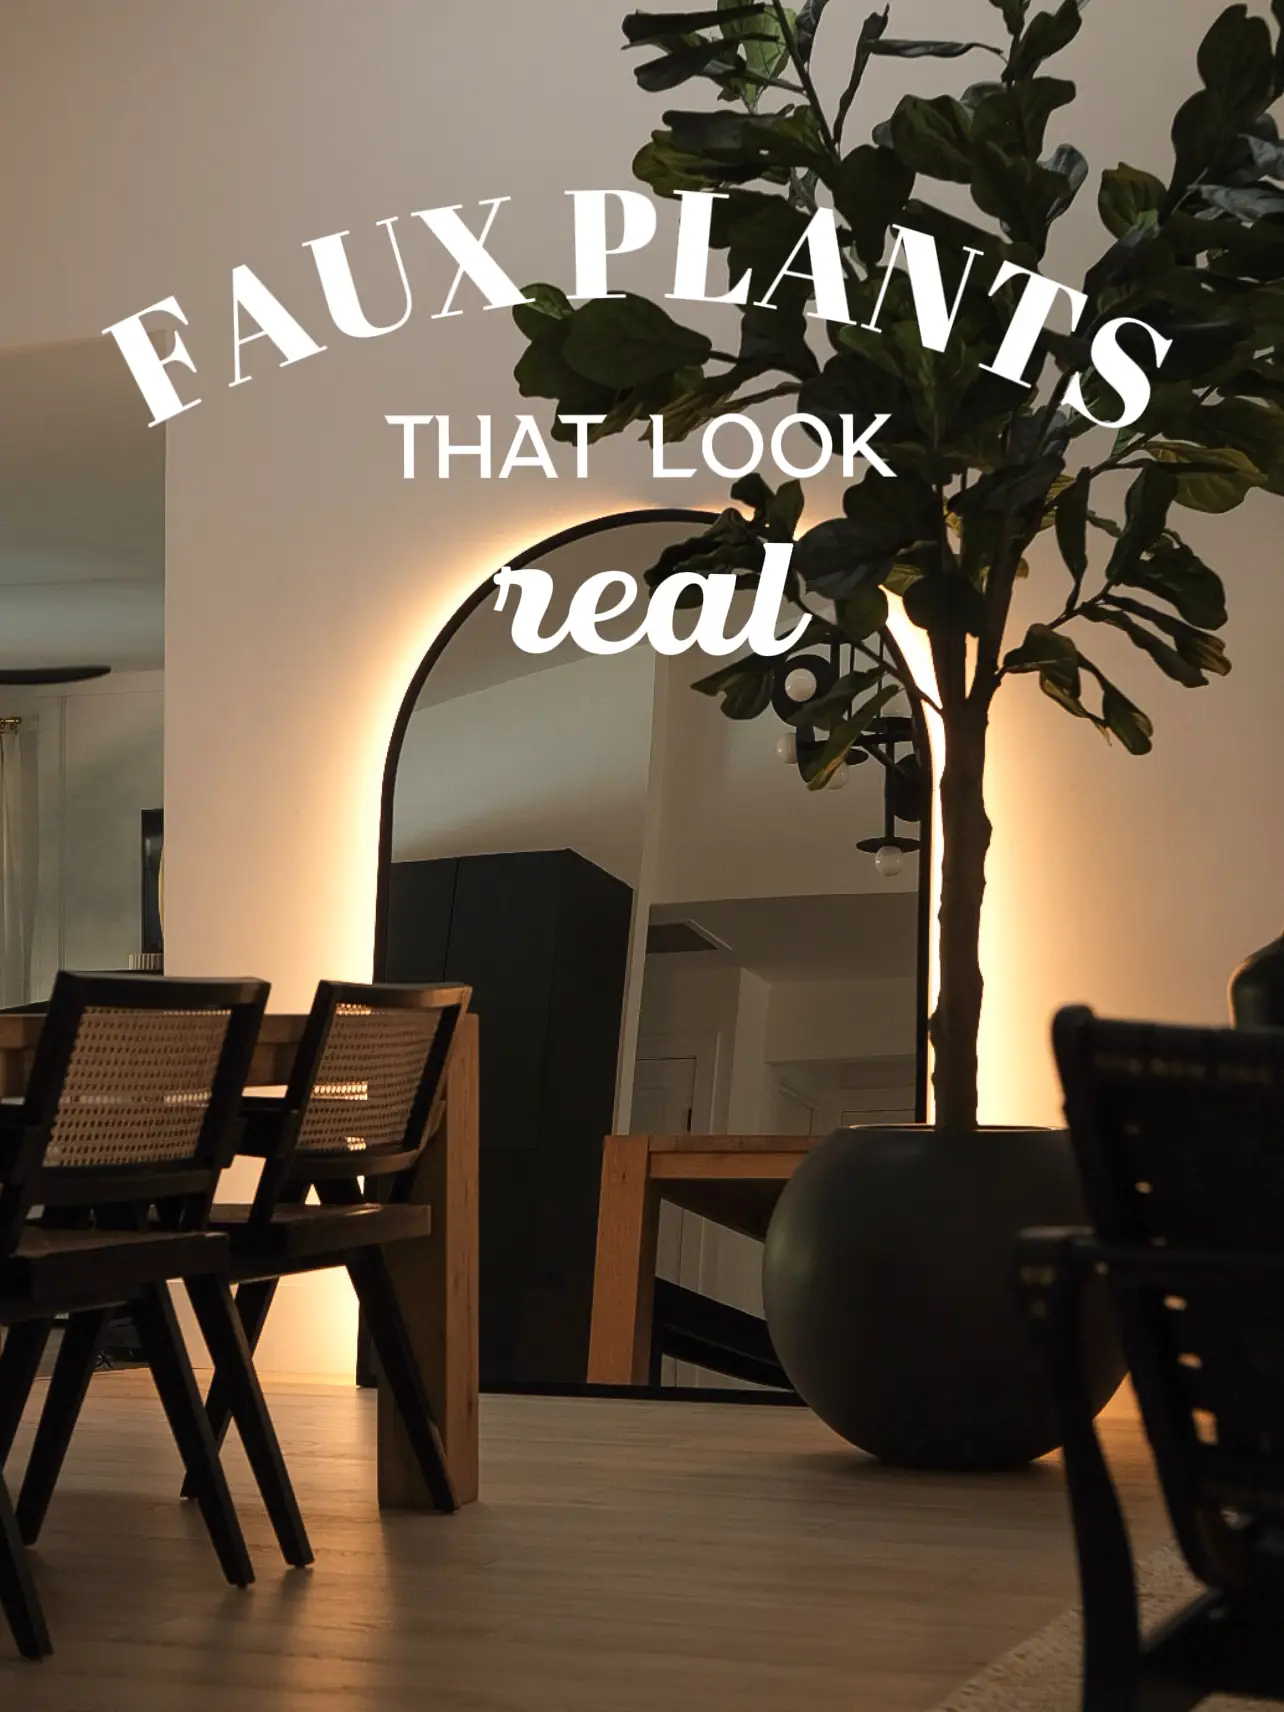 Faux plants that look real!, Gallery posted by Haley Jones